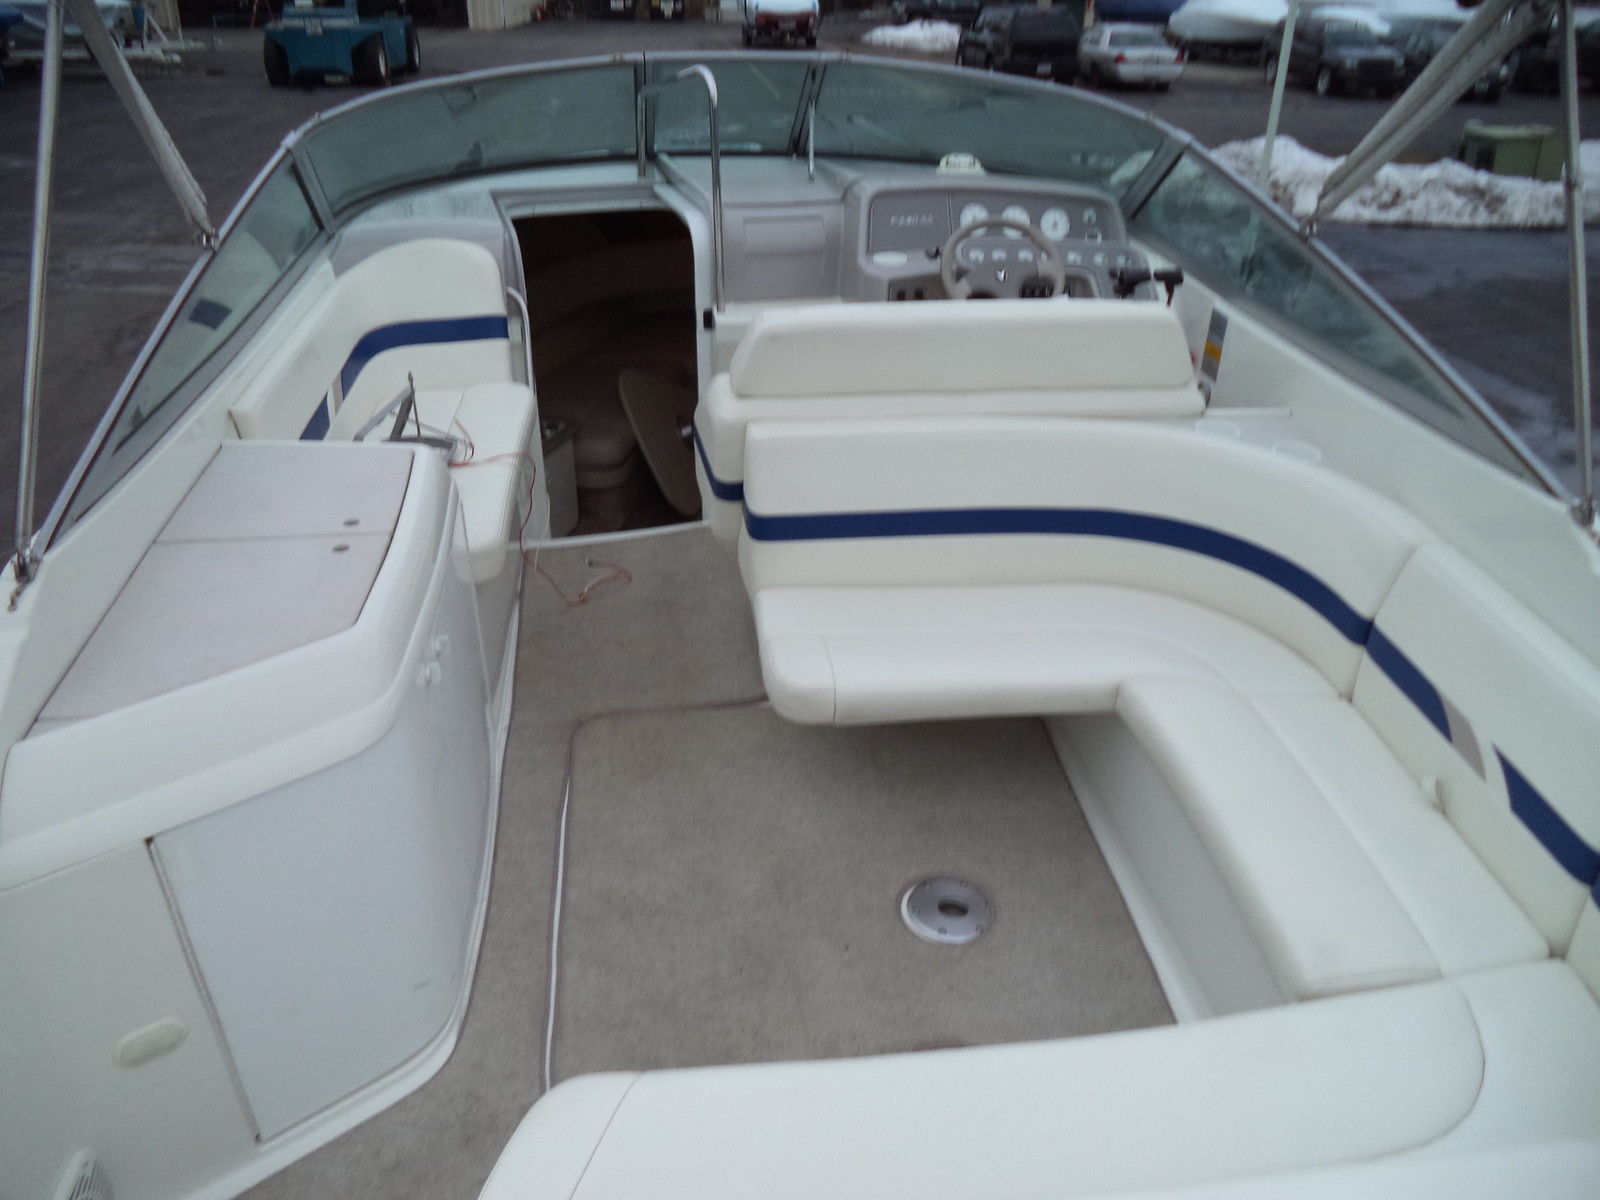 Formula 280 Ss 2001 For Sale For 49 850 Boats From Usa Com